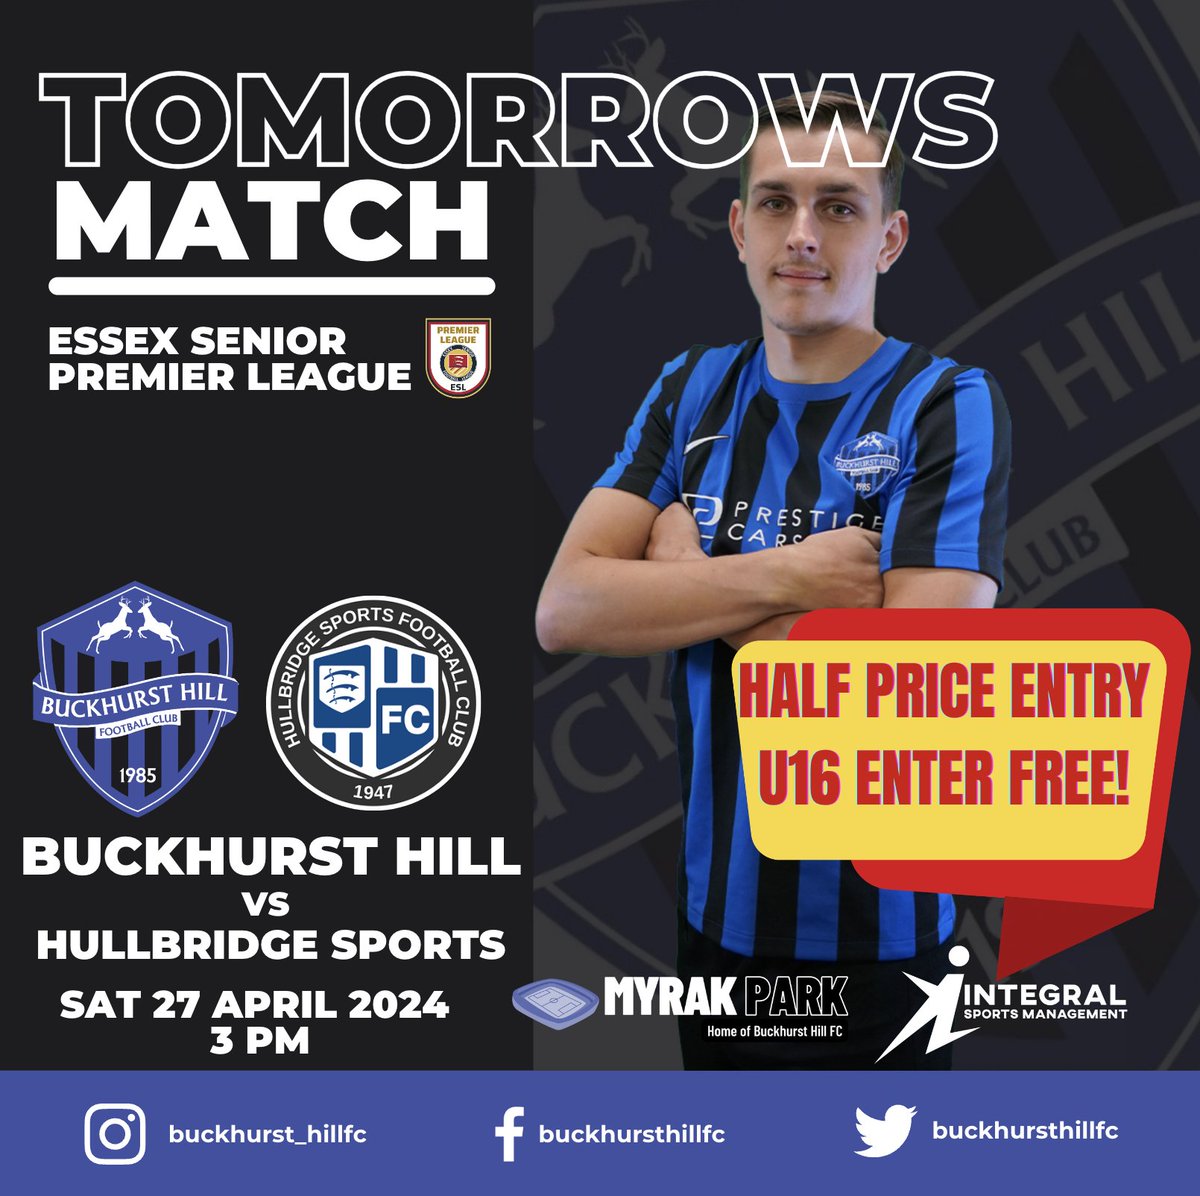 🚨LAST GAME OF THE SEASON - HALF-PRICE ENTRY🚨 + u16s get in 🆓 + 🆓 programme on entry + Best burgers in the league 🍔 + Coldest beers 🍺 + Greatest vibes in town! 😃 #COYStags 🦌